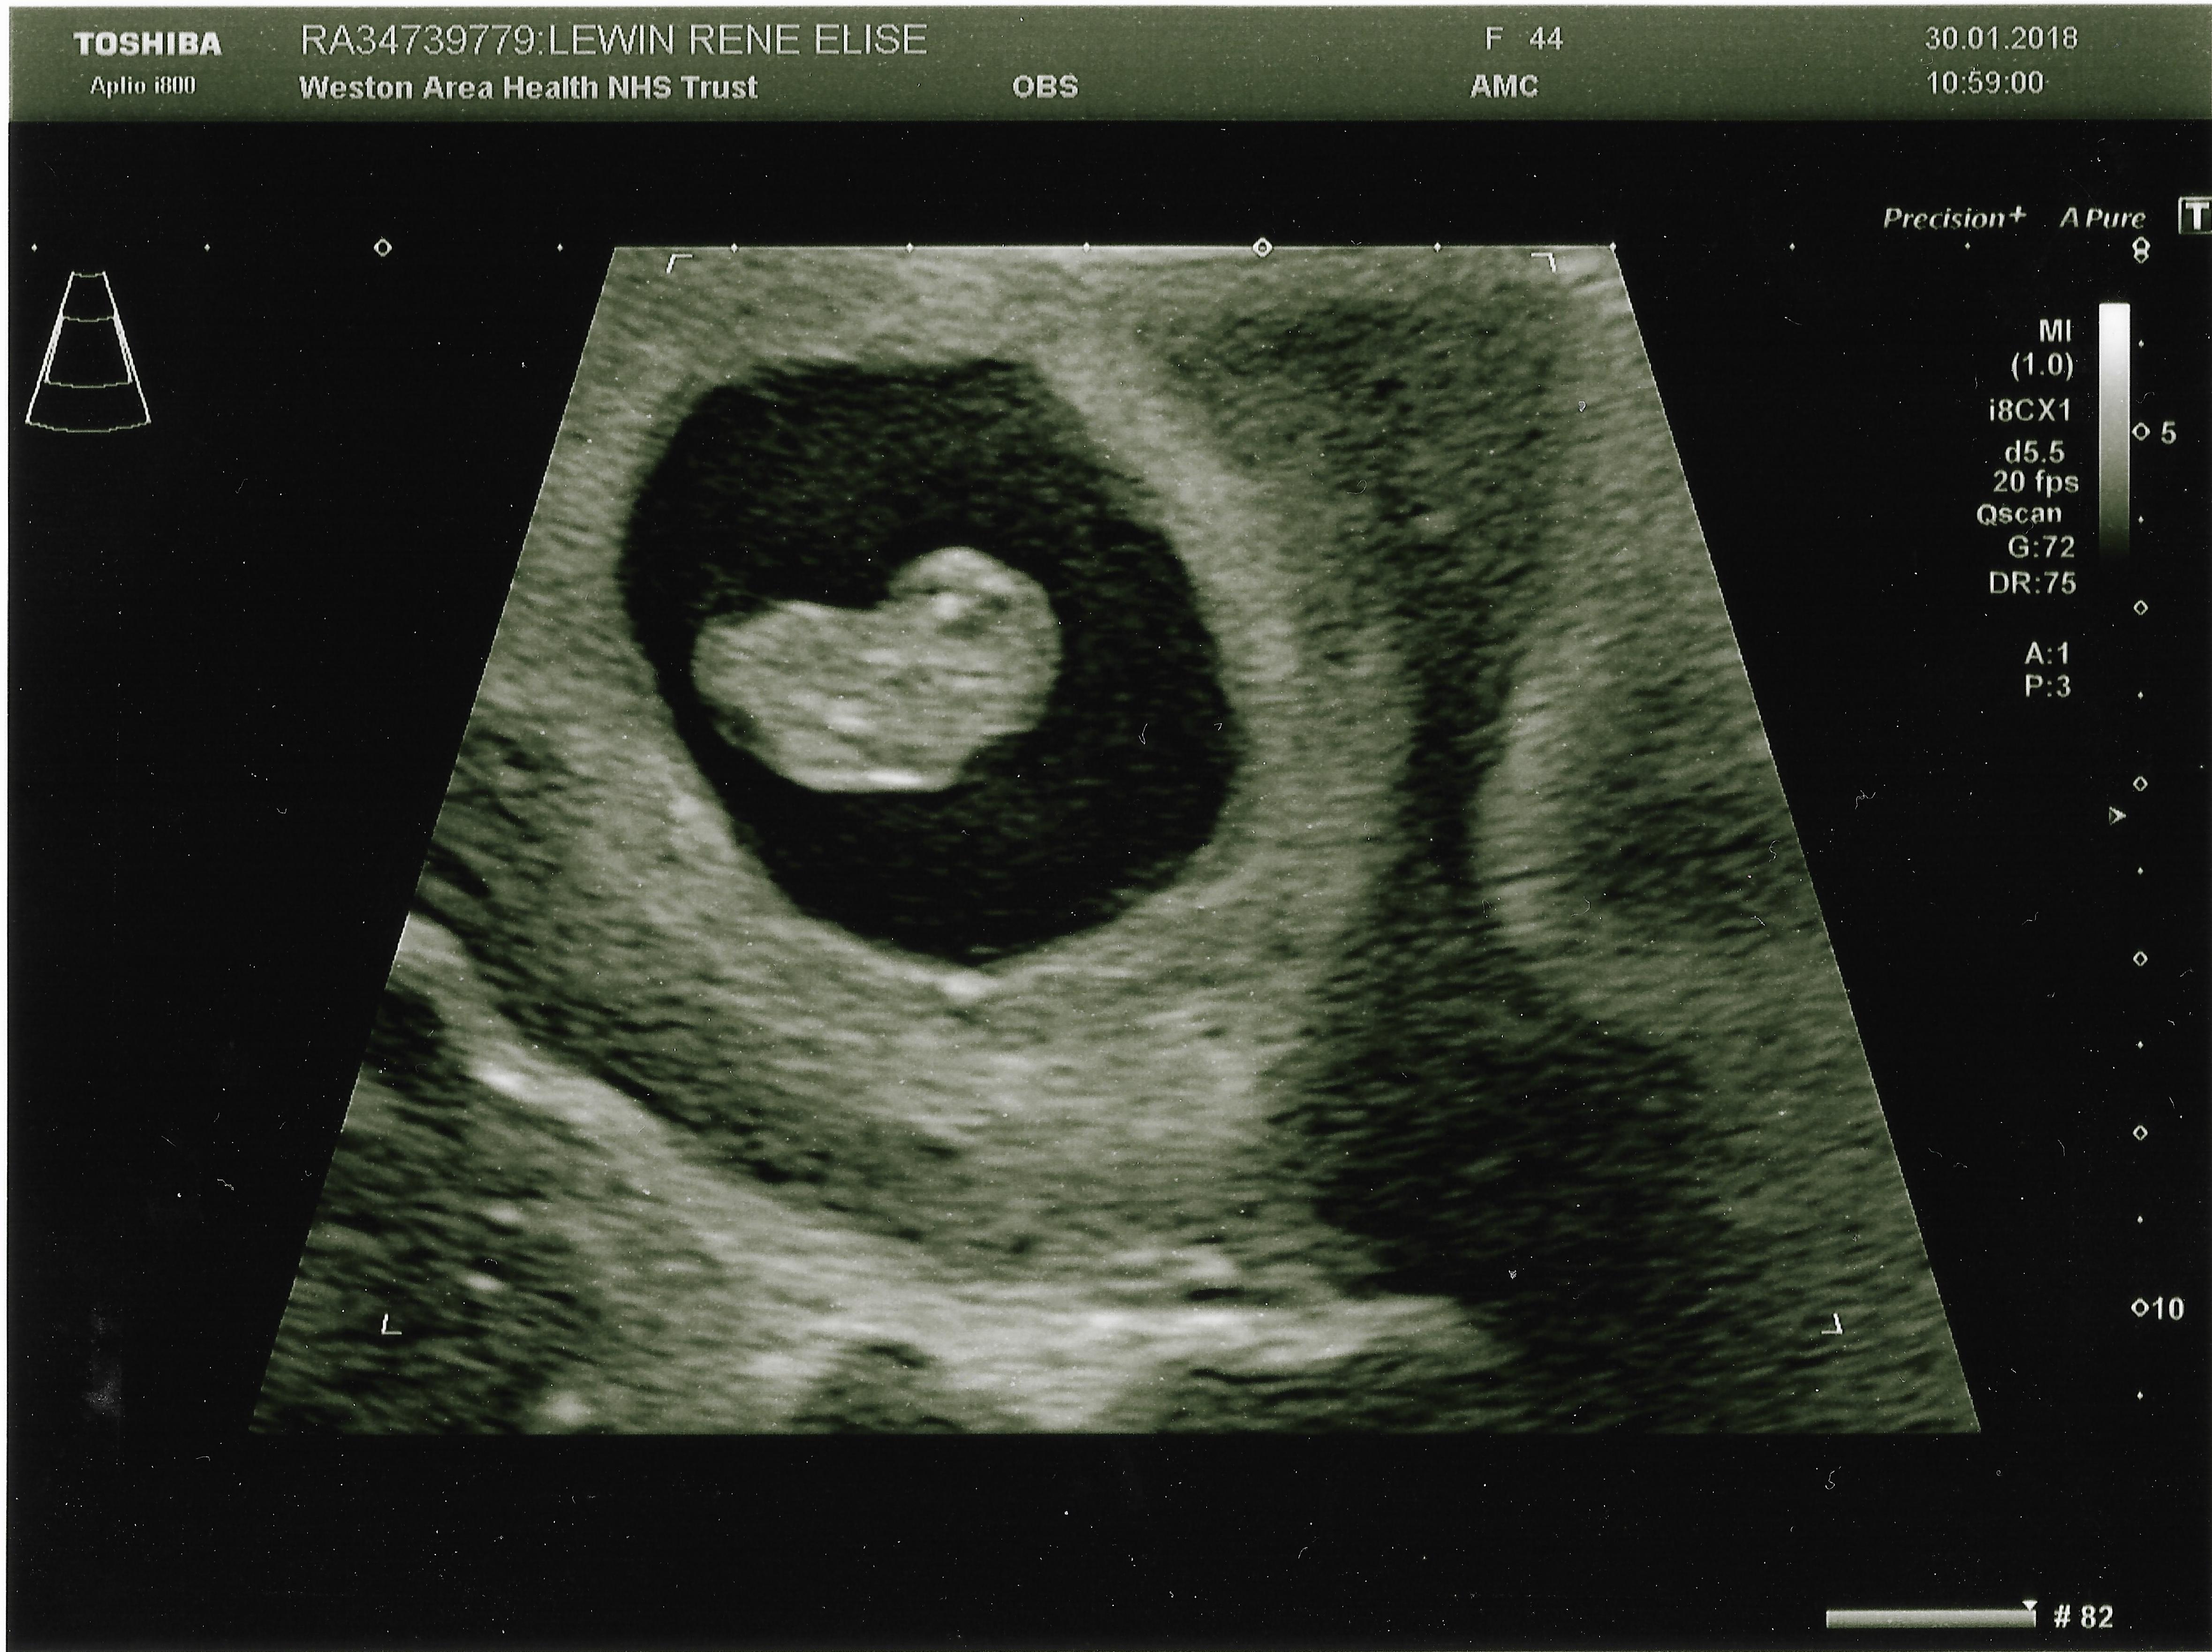 Baby 1st scan